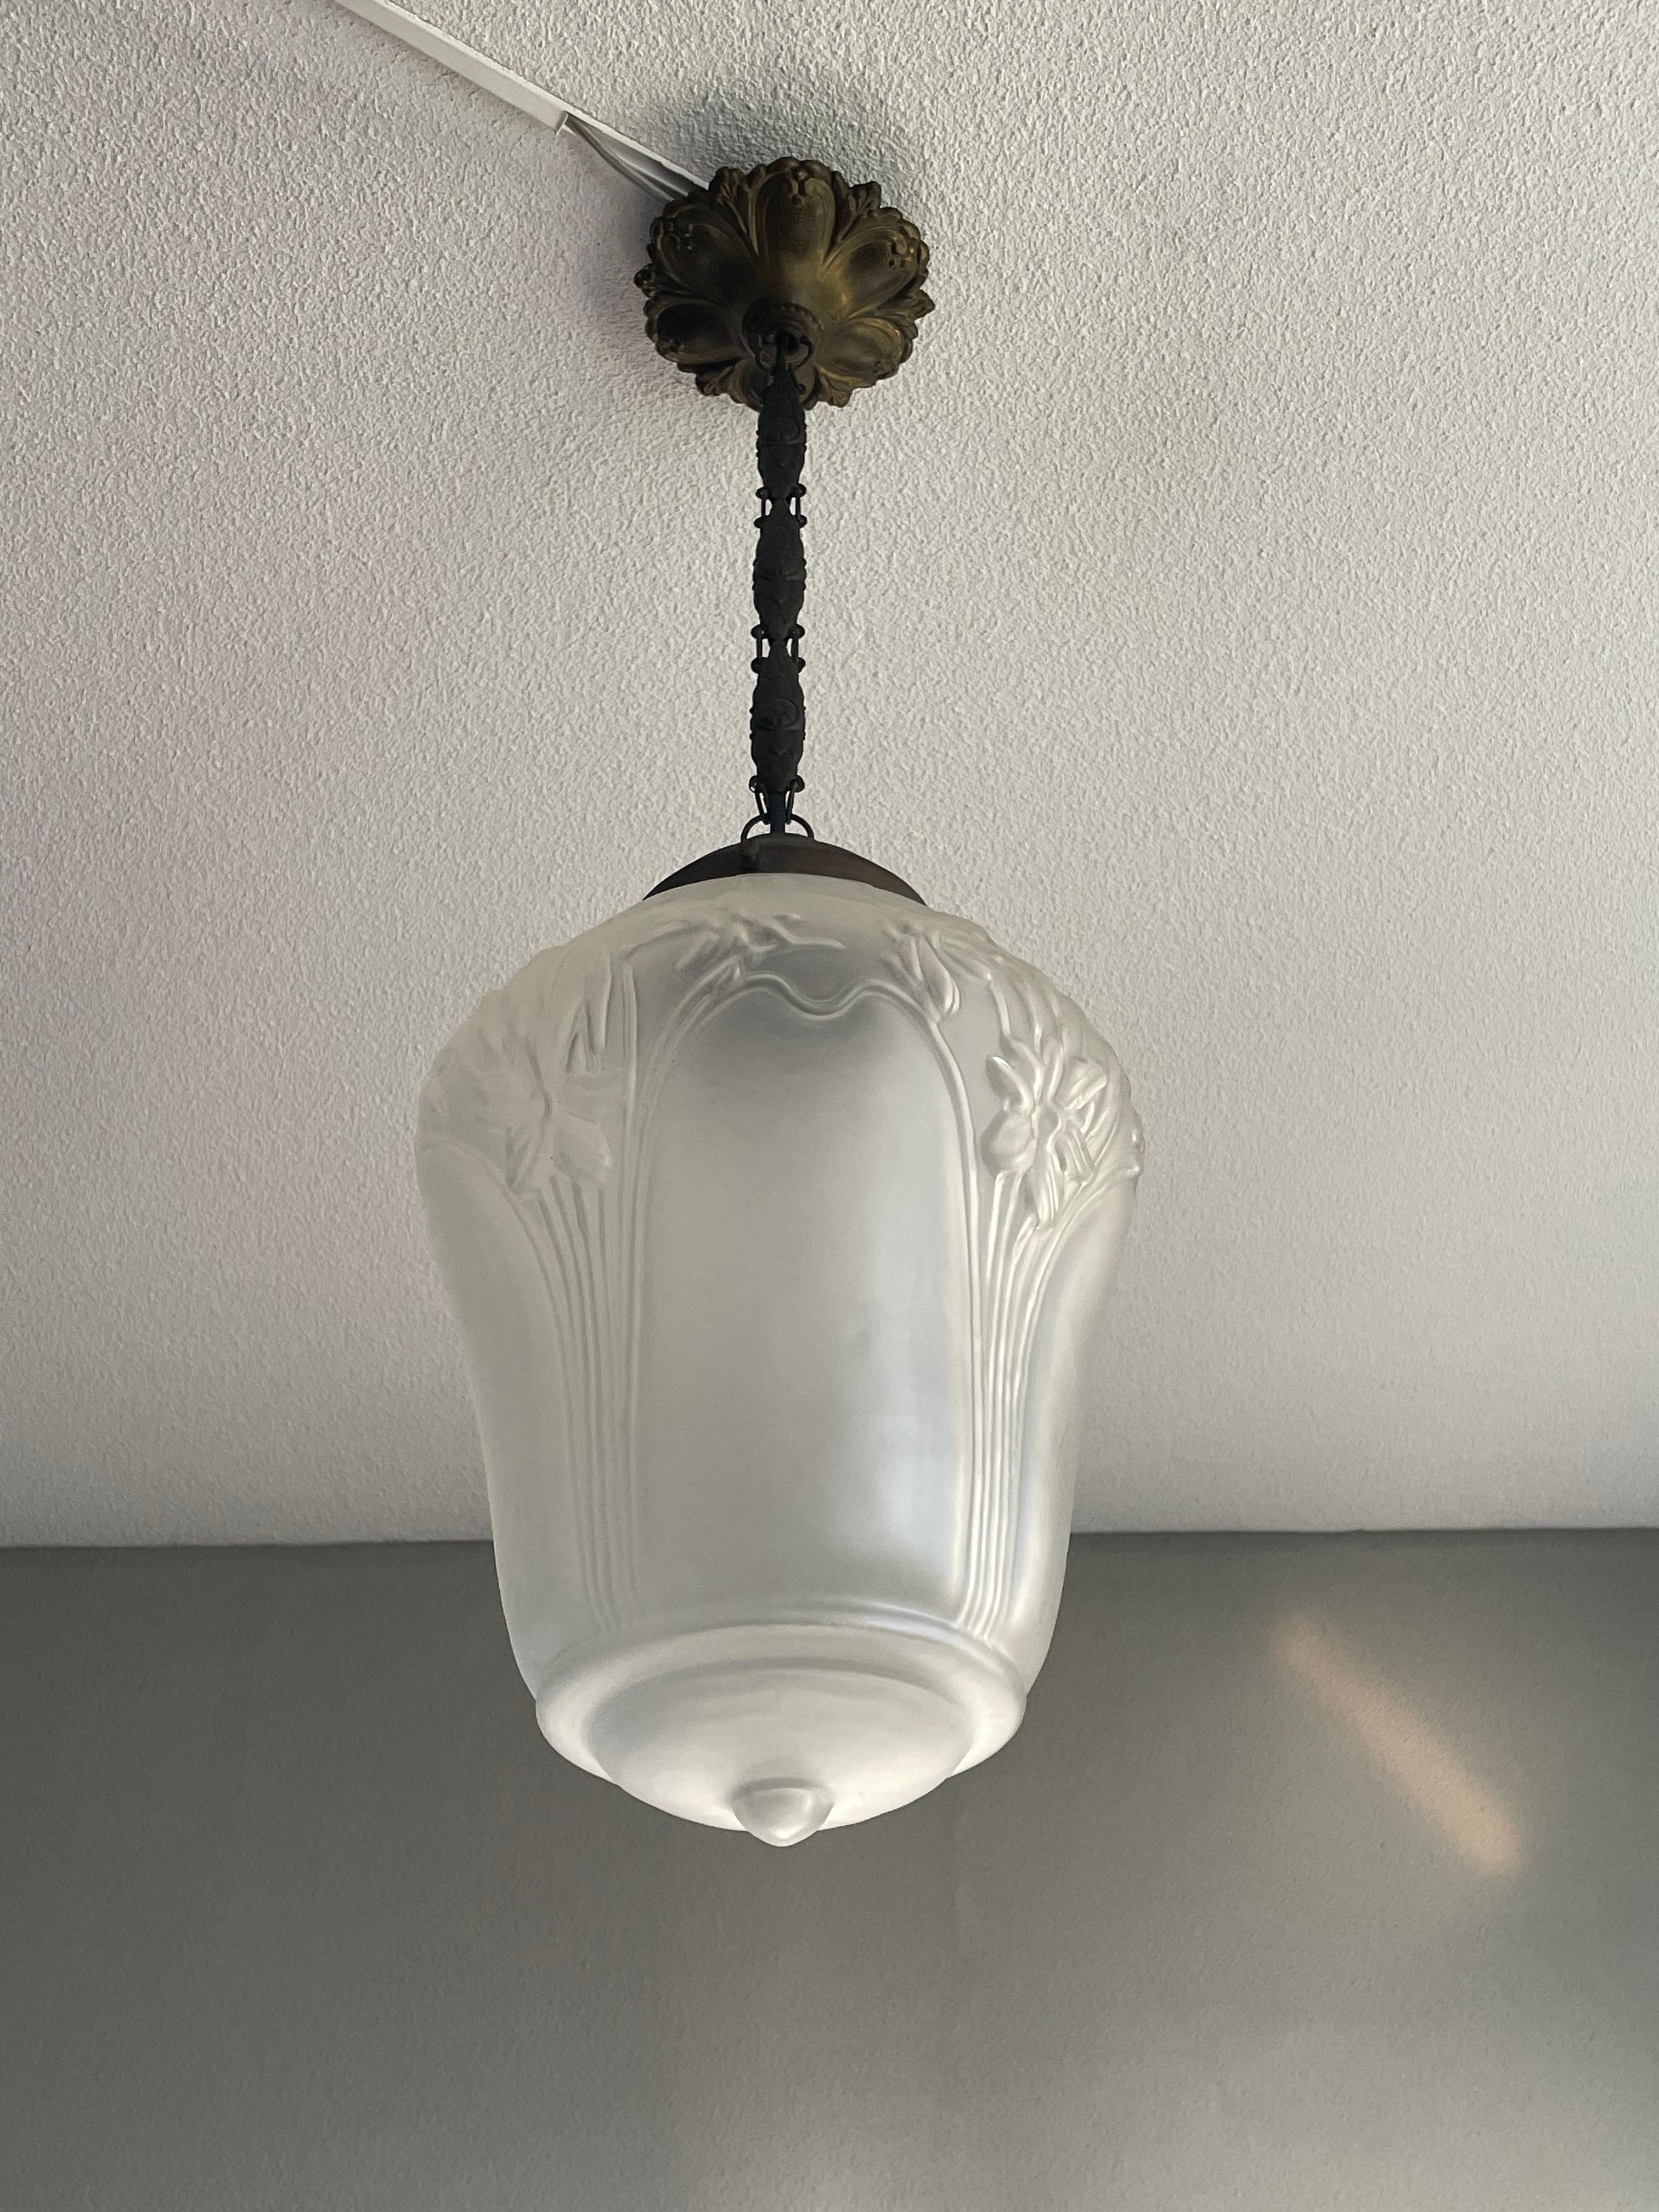 Original Arts and Crafts Glass Hallway Pendant Light with Daffodil Flowers 1900s For Sale 5